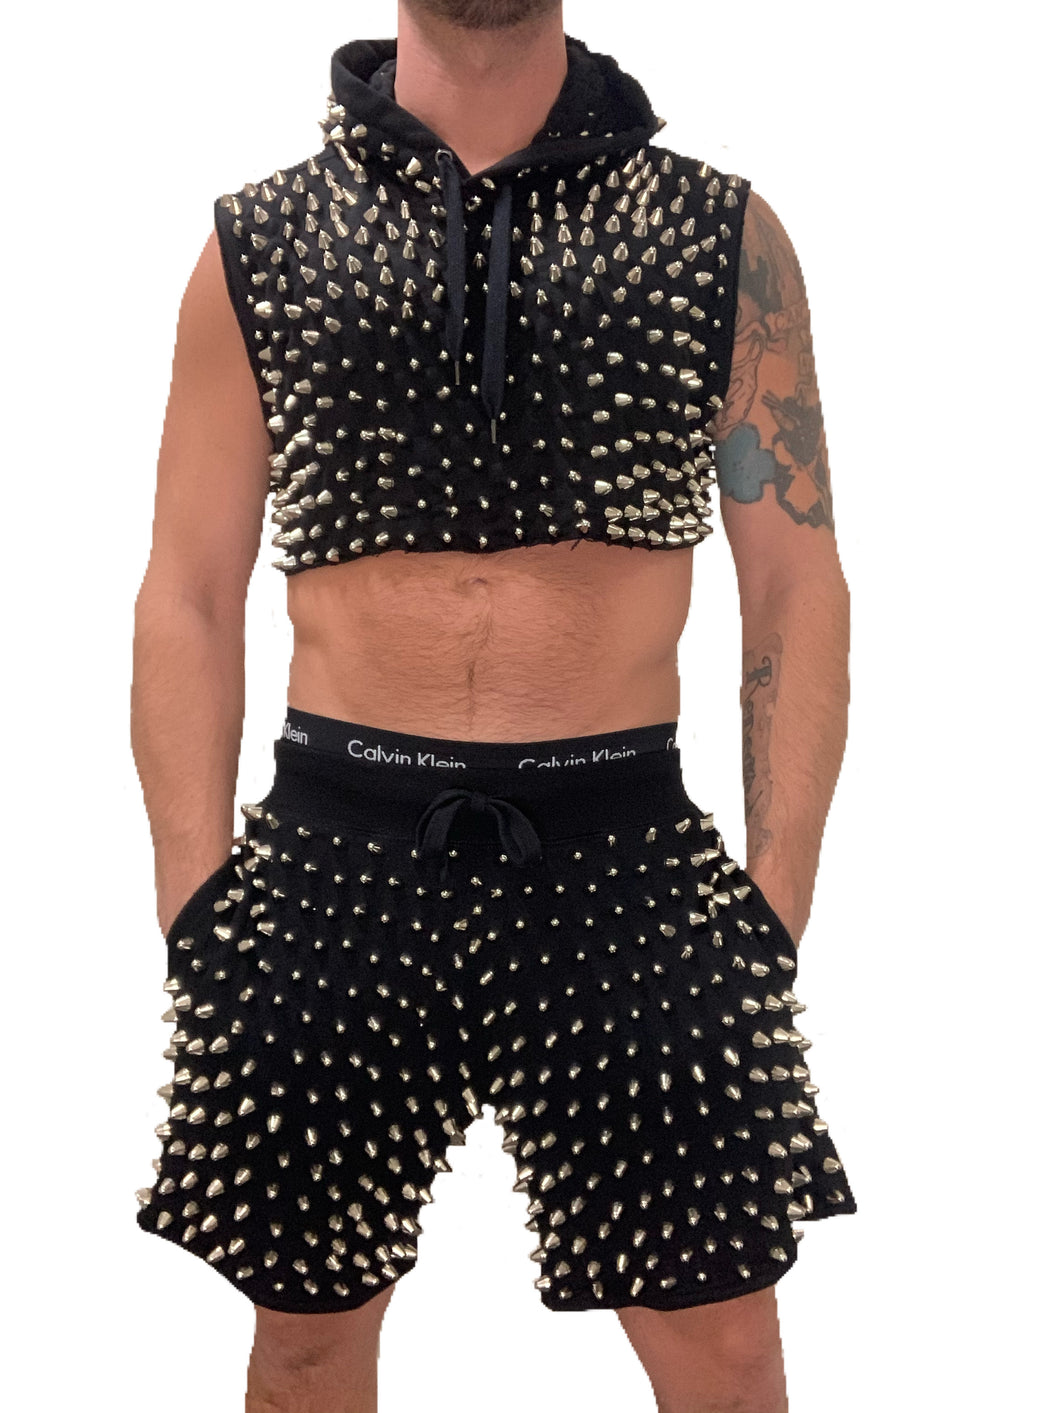 Studmuffin NYC Spike Crop Top Hoodie - Spike Sweat Shorts 2 Set- More Colors